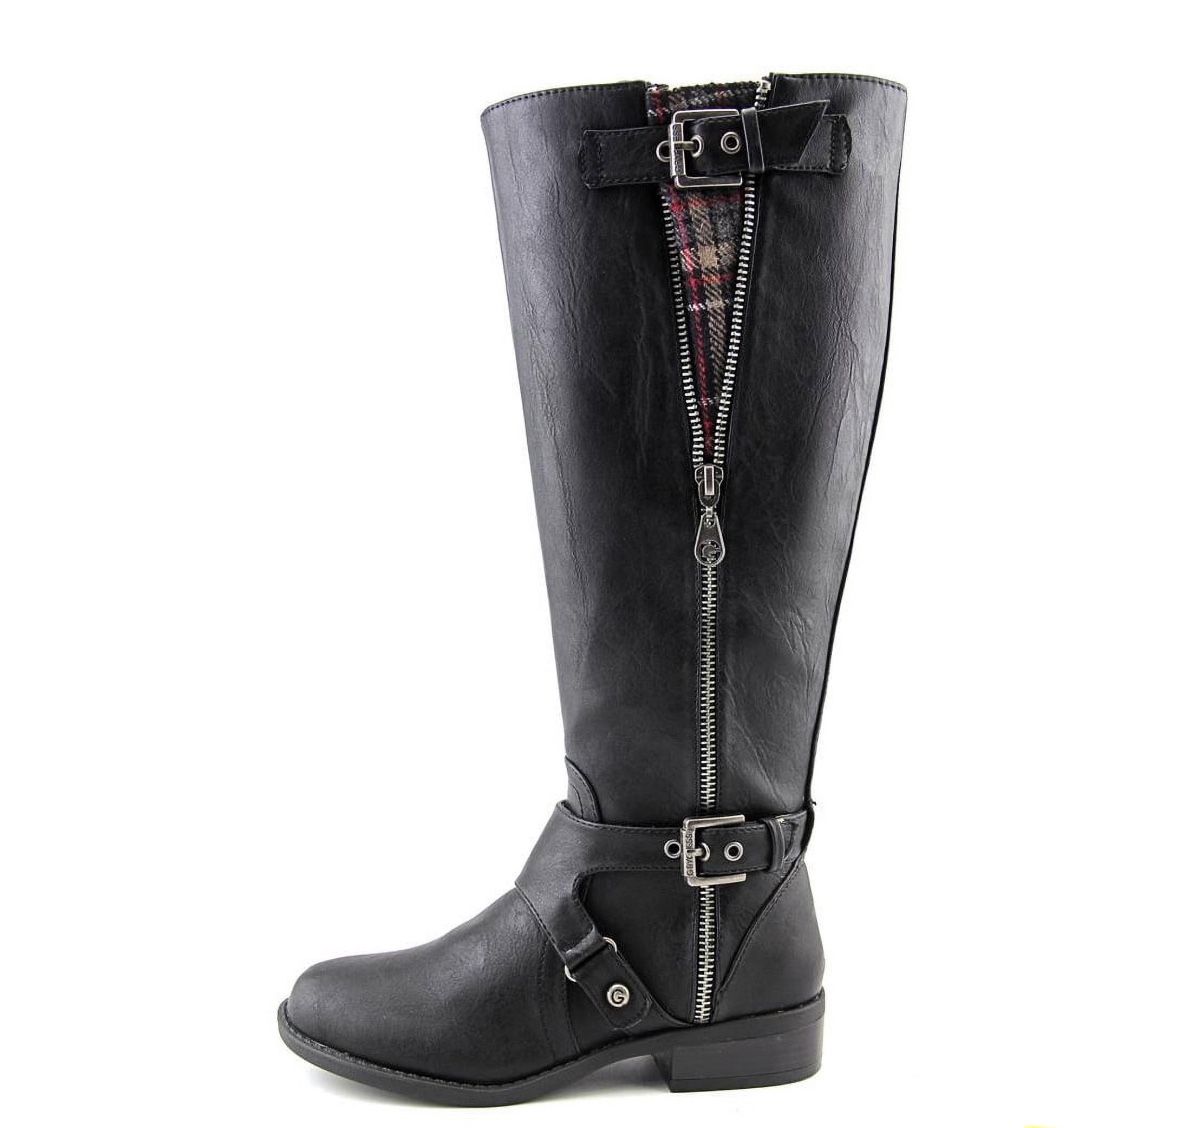 G By Guess Women's Hertle 2 Wide Calf Knee High Riding Boots